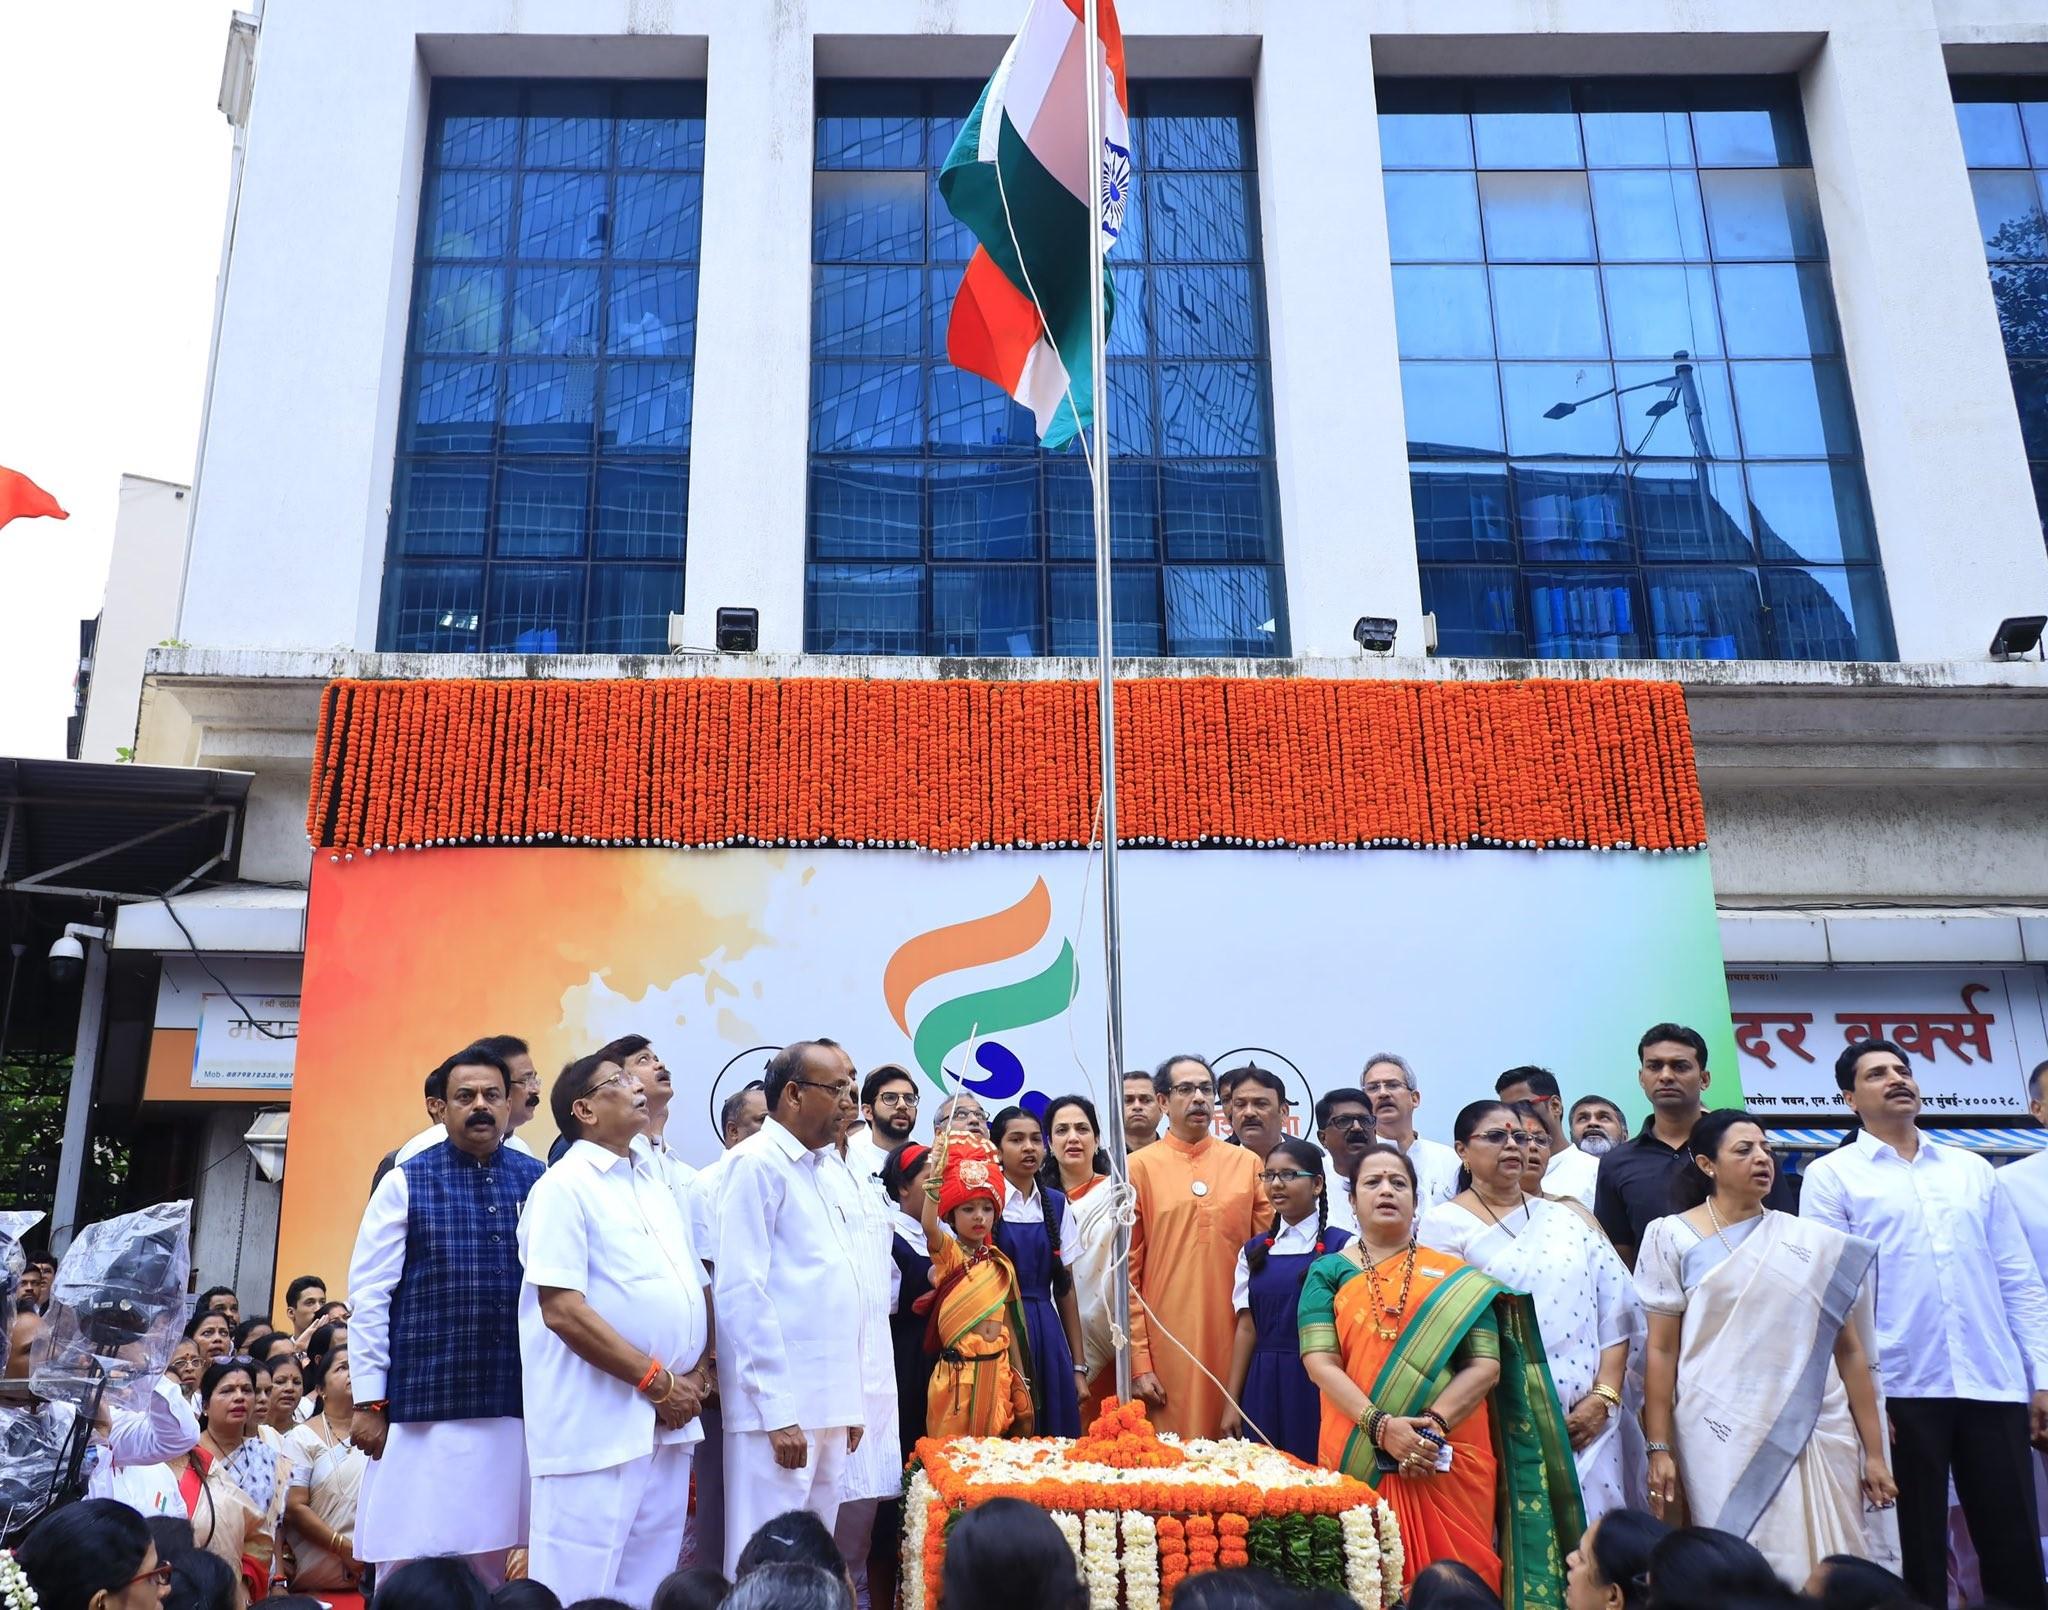 On the occasion of Independence Day, Uddhav Thackeray hoisted the tricolour at Sena Bhavan in Dadar. Pic/Official Twitter handle